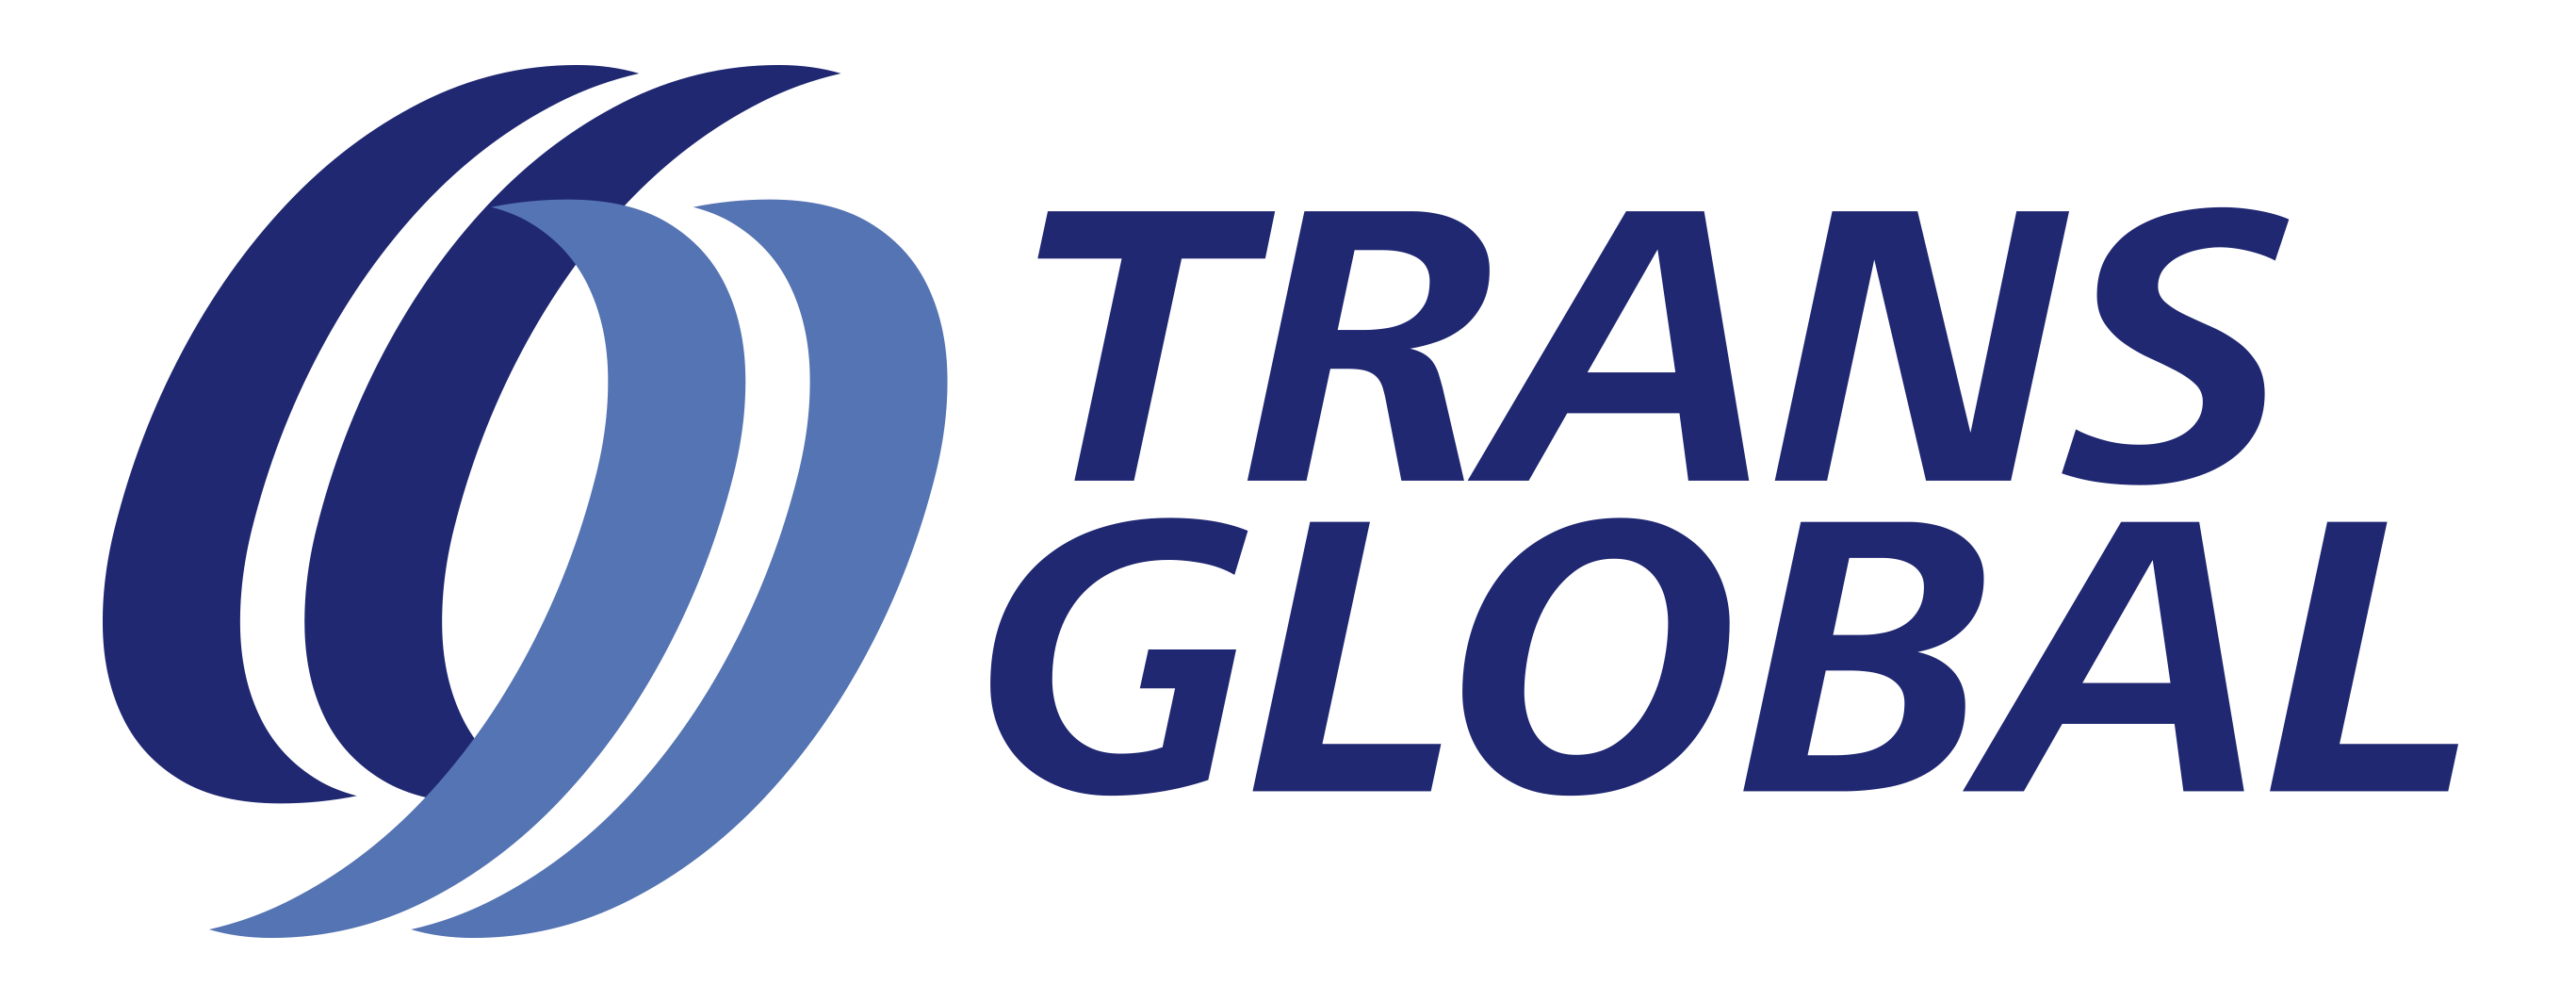 transglobal-scaled Altres